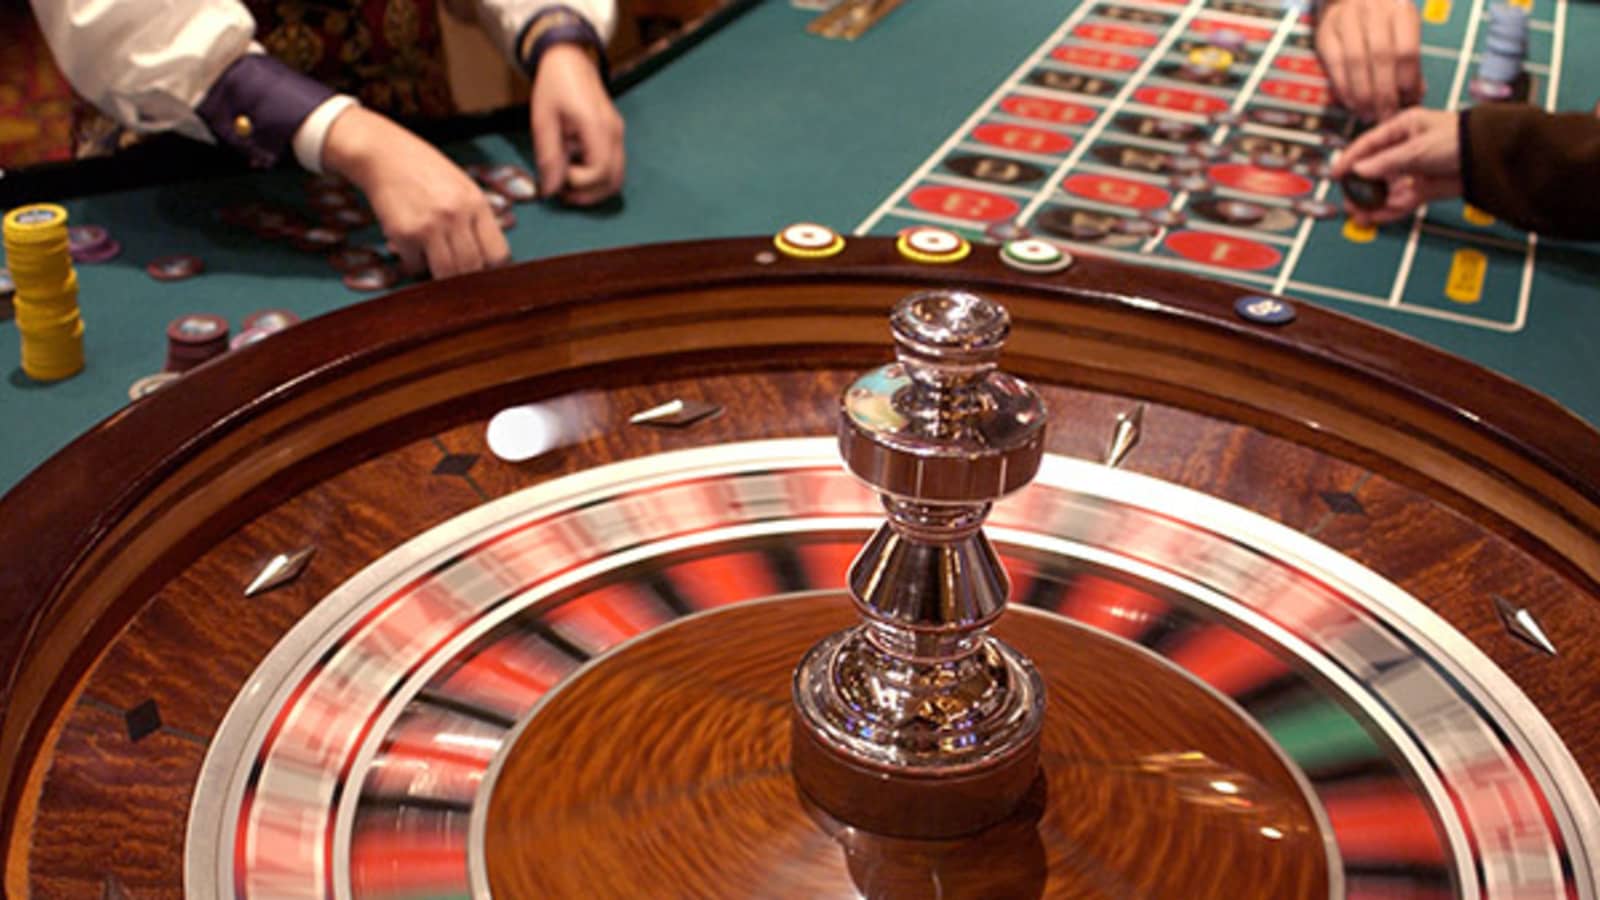 As Singapore's Casinos Slow, Will the Economy Suffer?